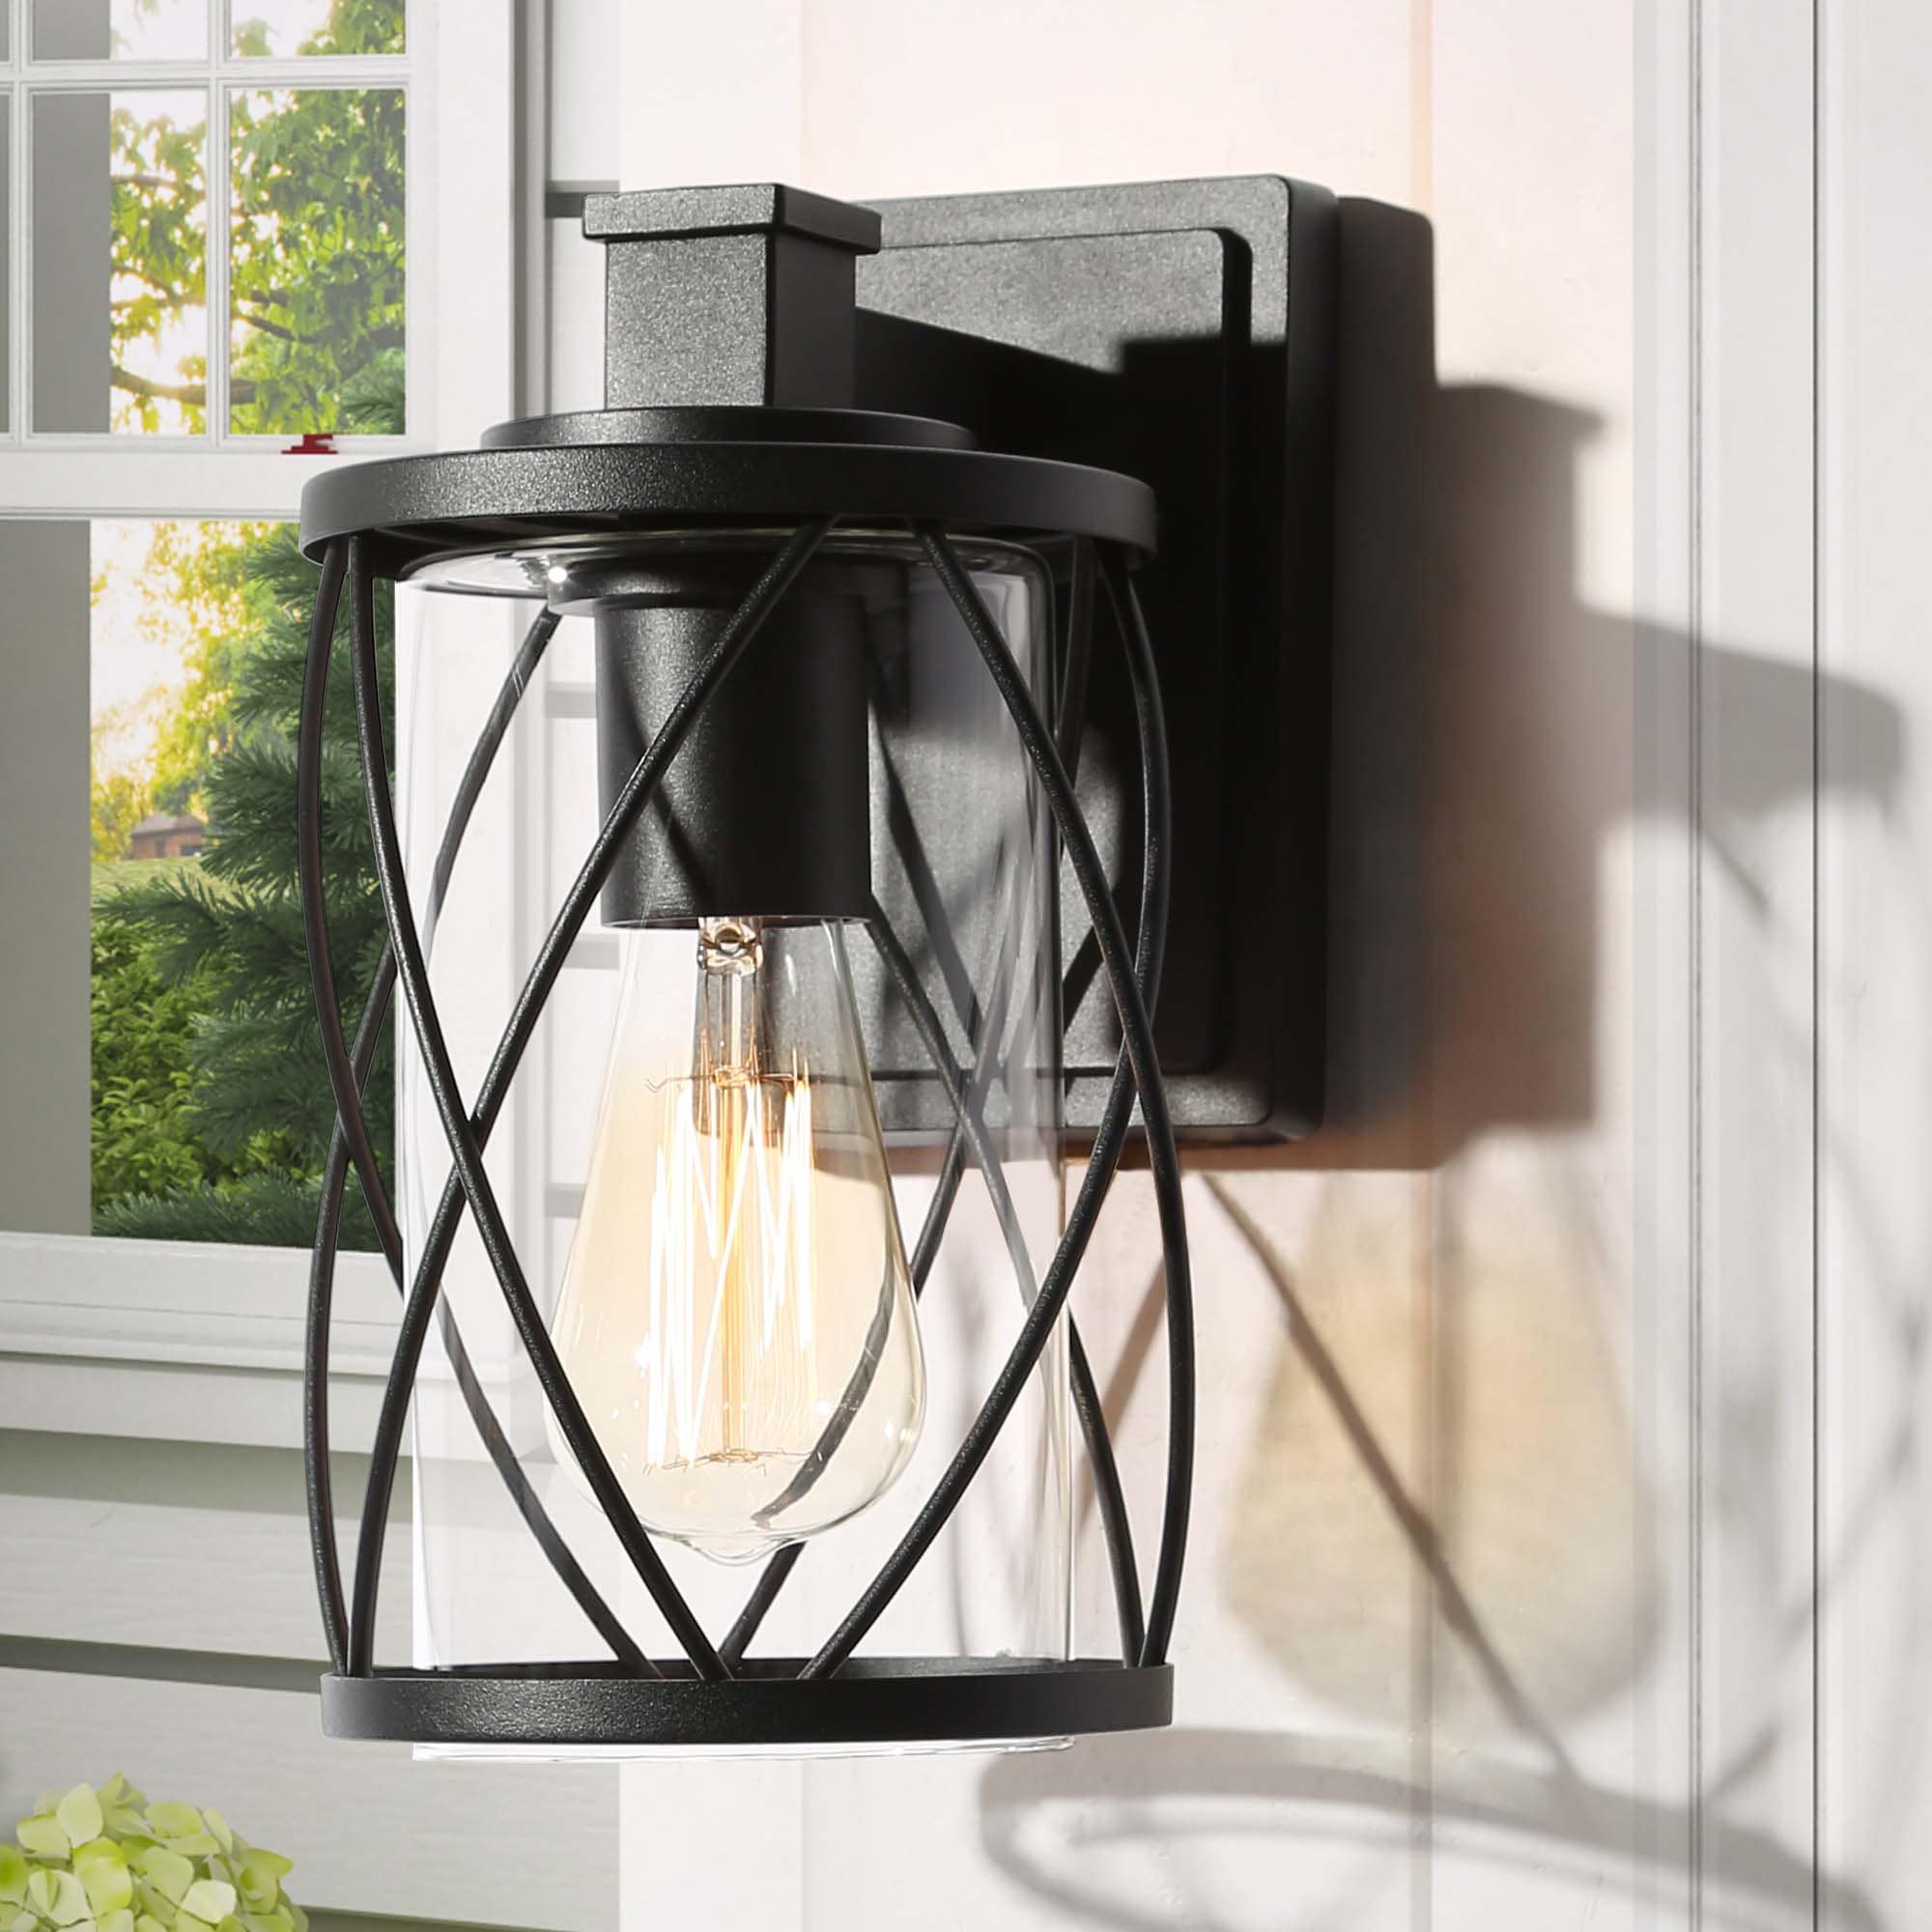 Outdoor Wall Mount Lantern Lamp Sconce Exterior Clear Glass Lighting Fixture 